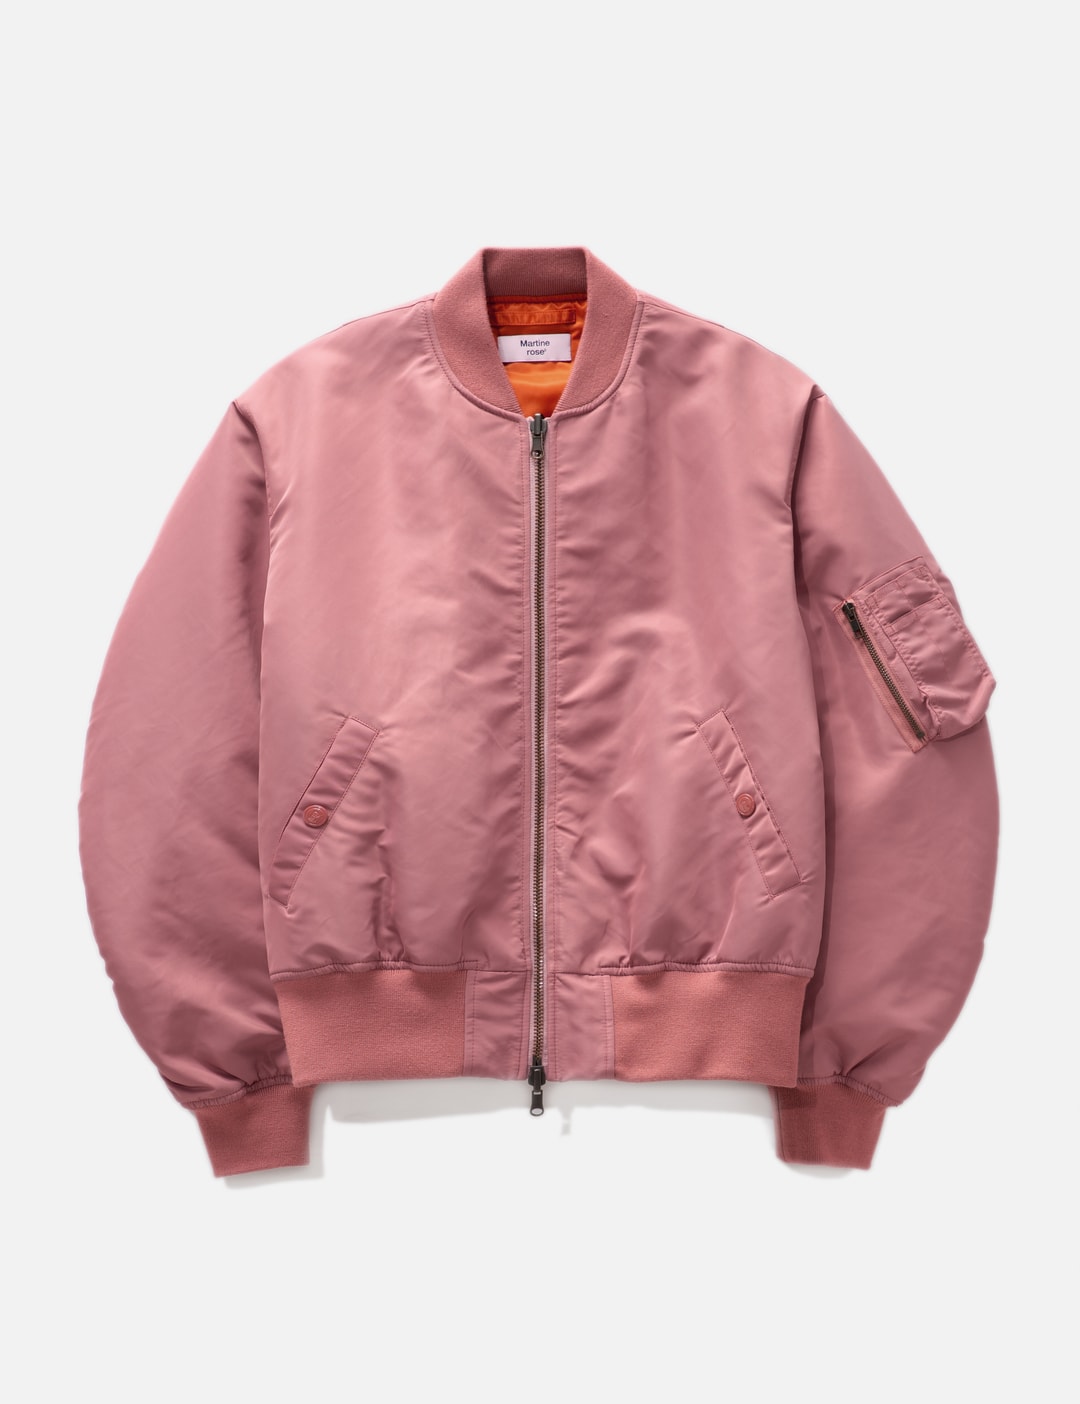 Martine Rose - Classic Bomber | HBX - Globally Curated Fashion and ...